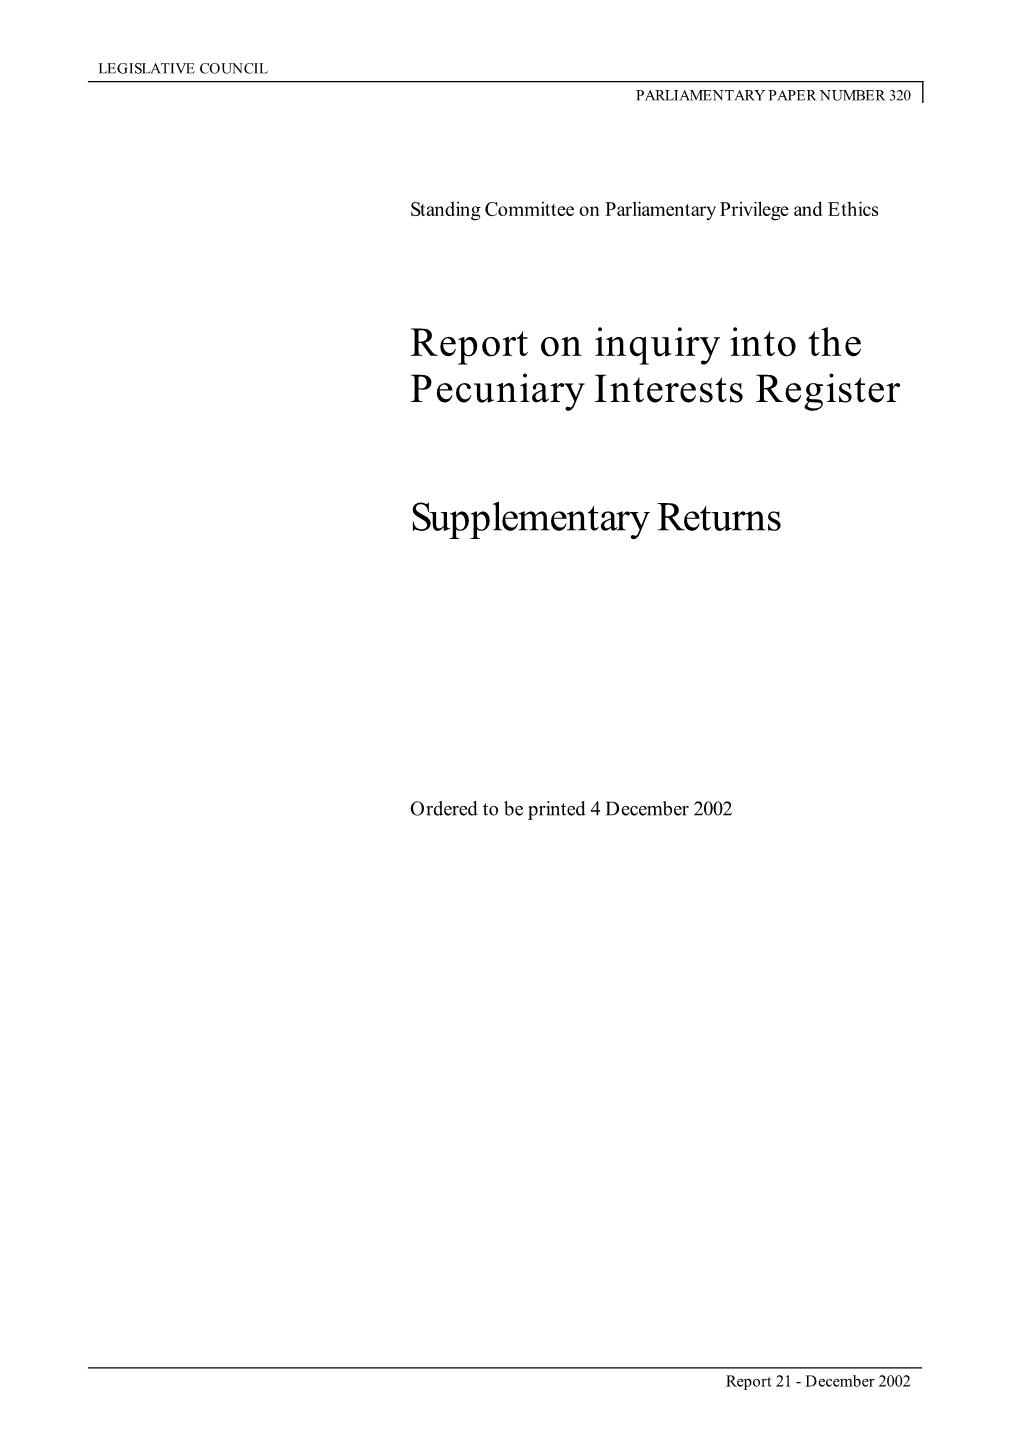 Report on Inquiry Into the Pecuniary Interest Register